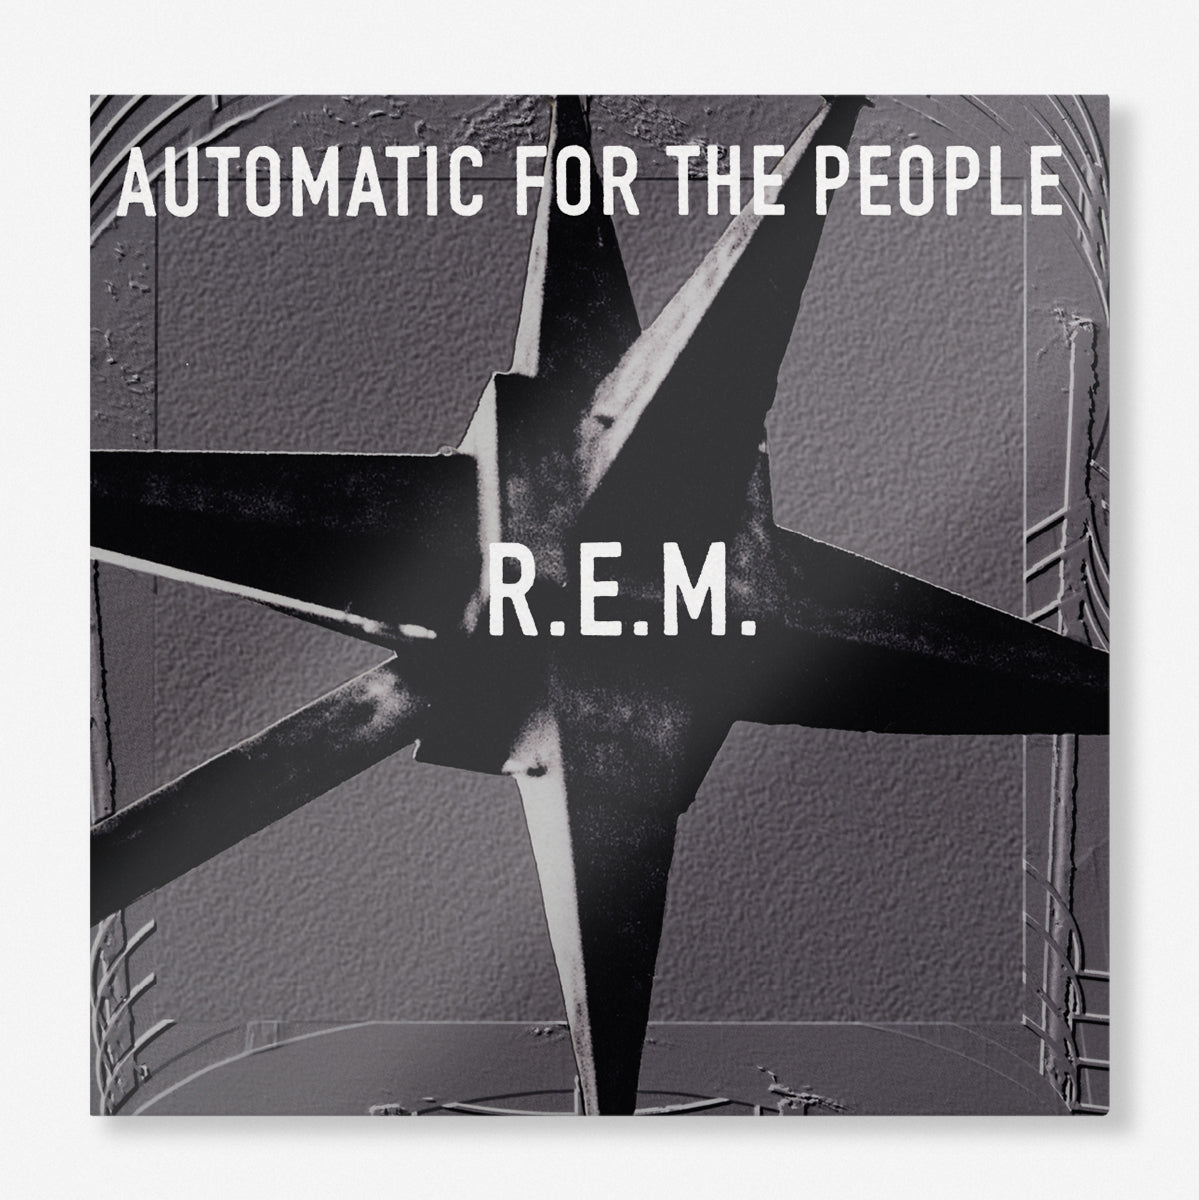 REM - Automatic For The People - Warner Bros. Records - 9362-45055-1,  Warn